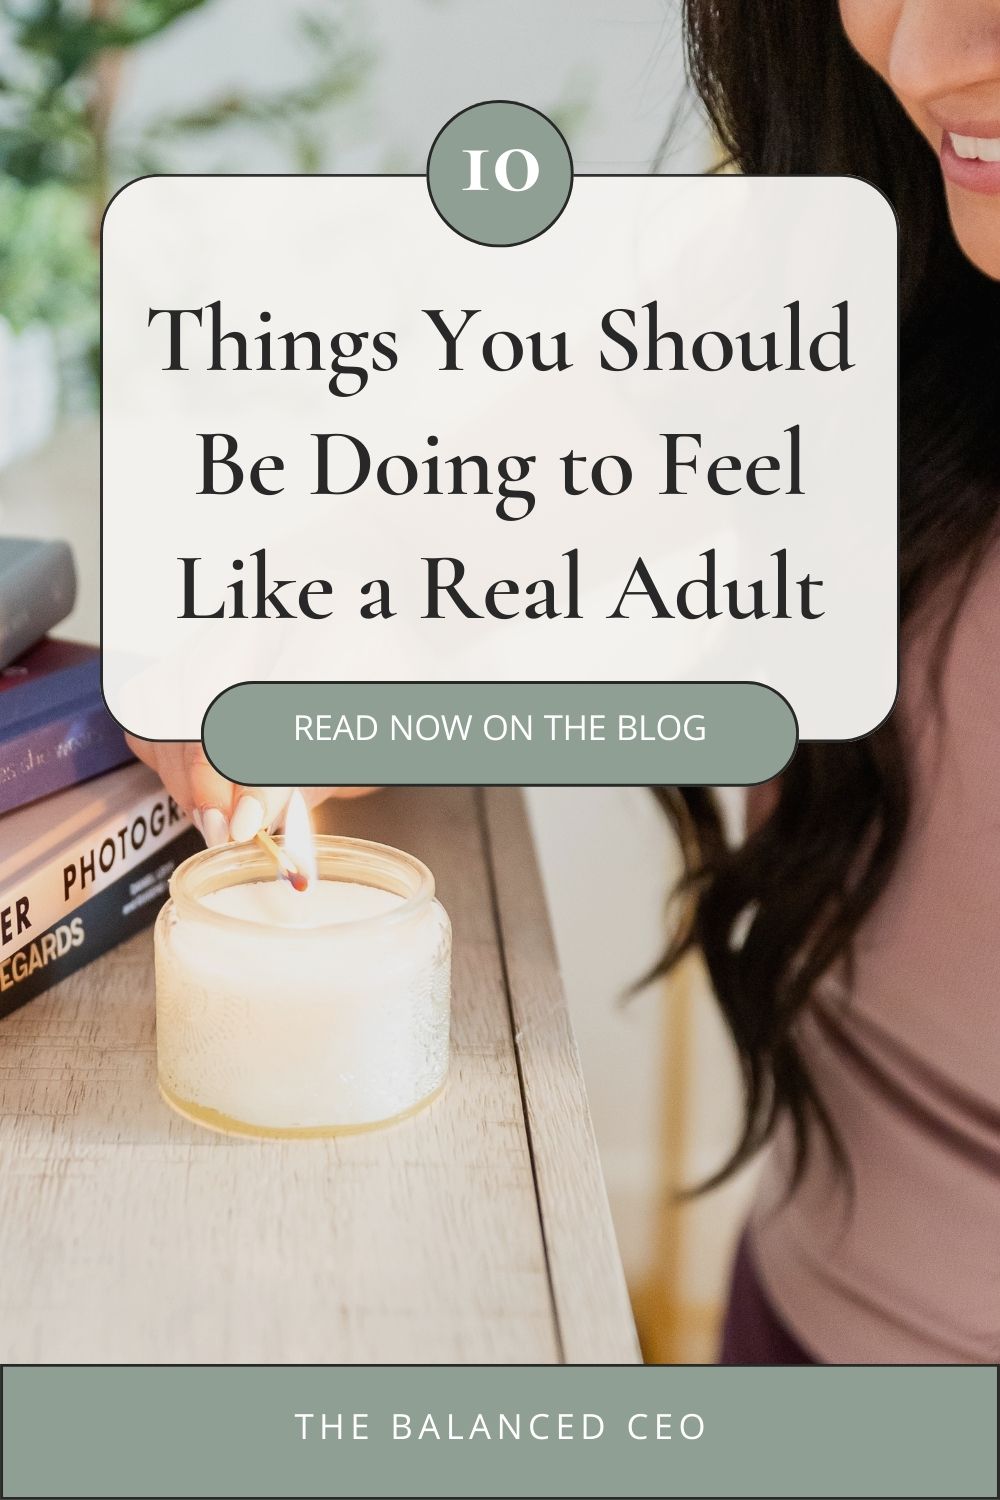 10 Things You Should Be Doing to Feel Like a Real Adult